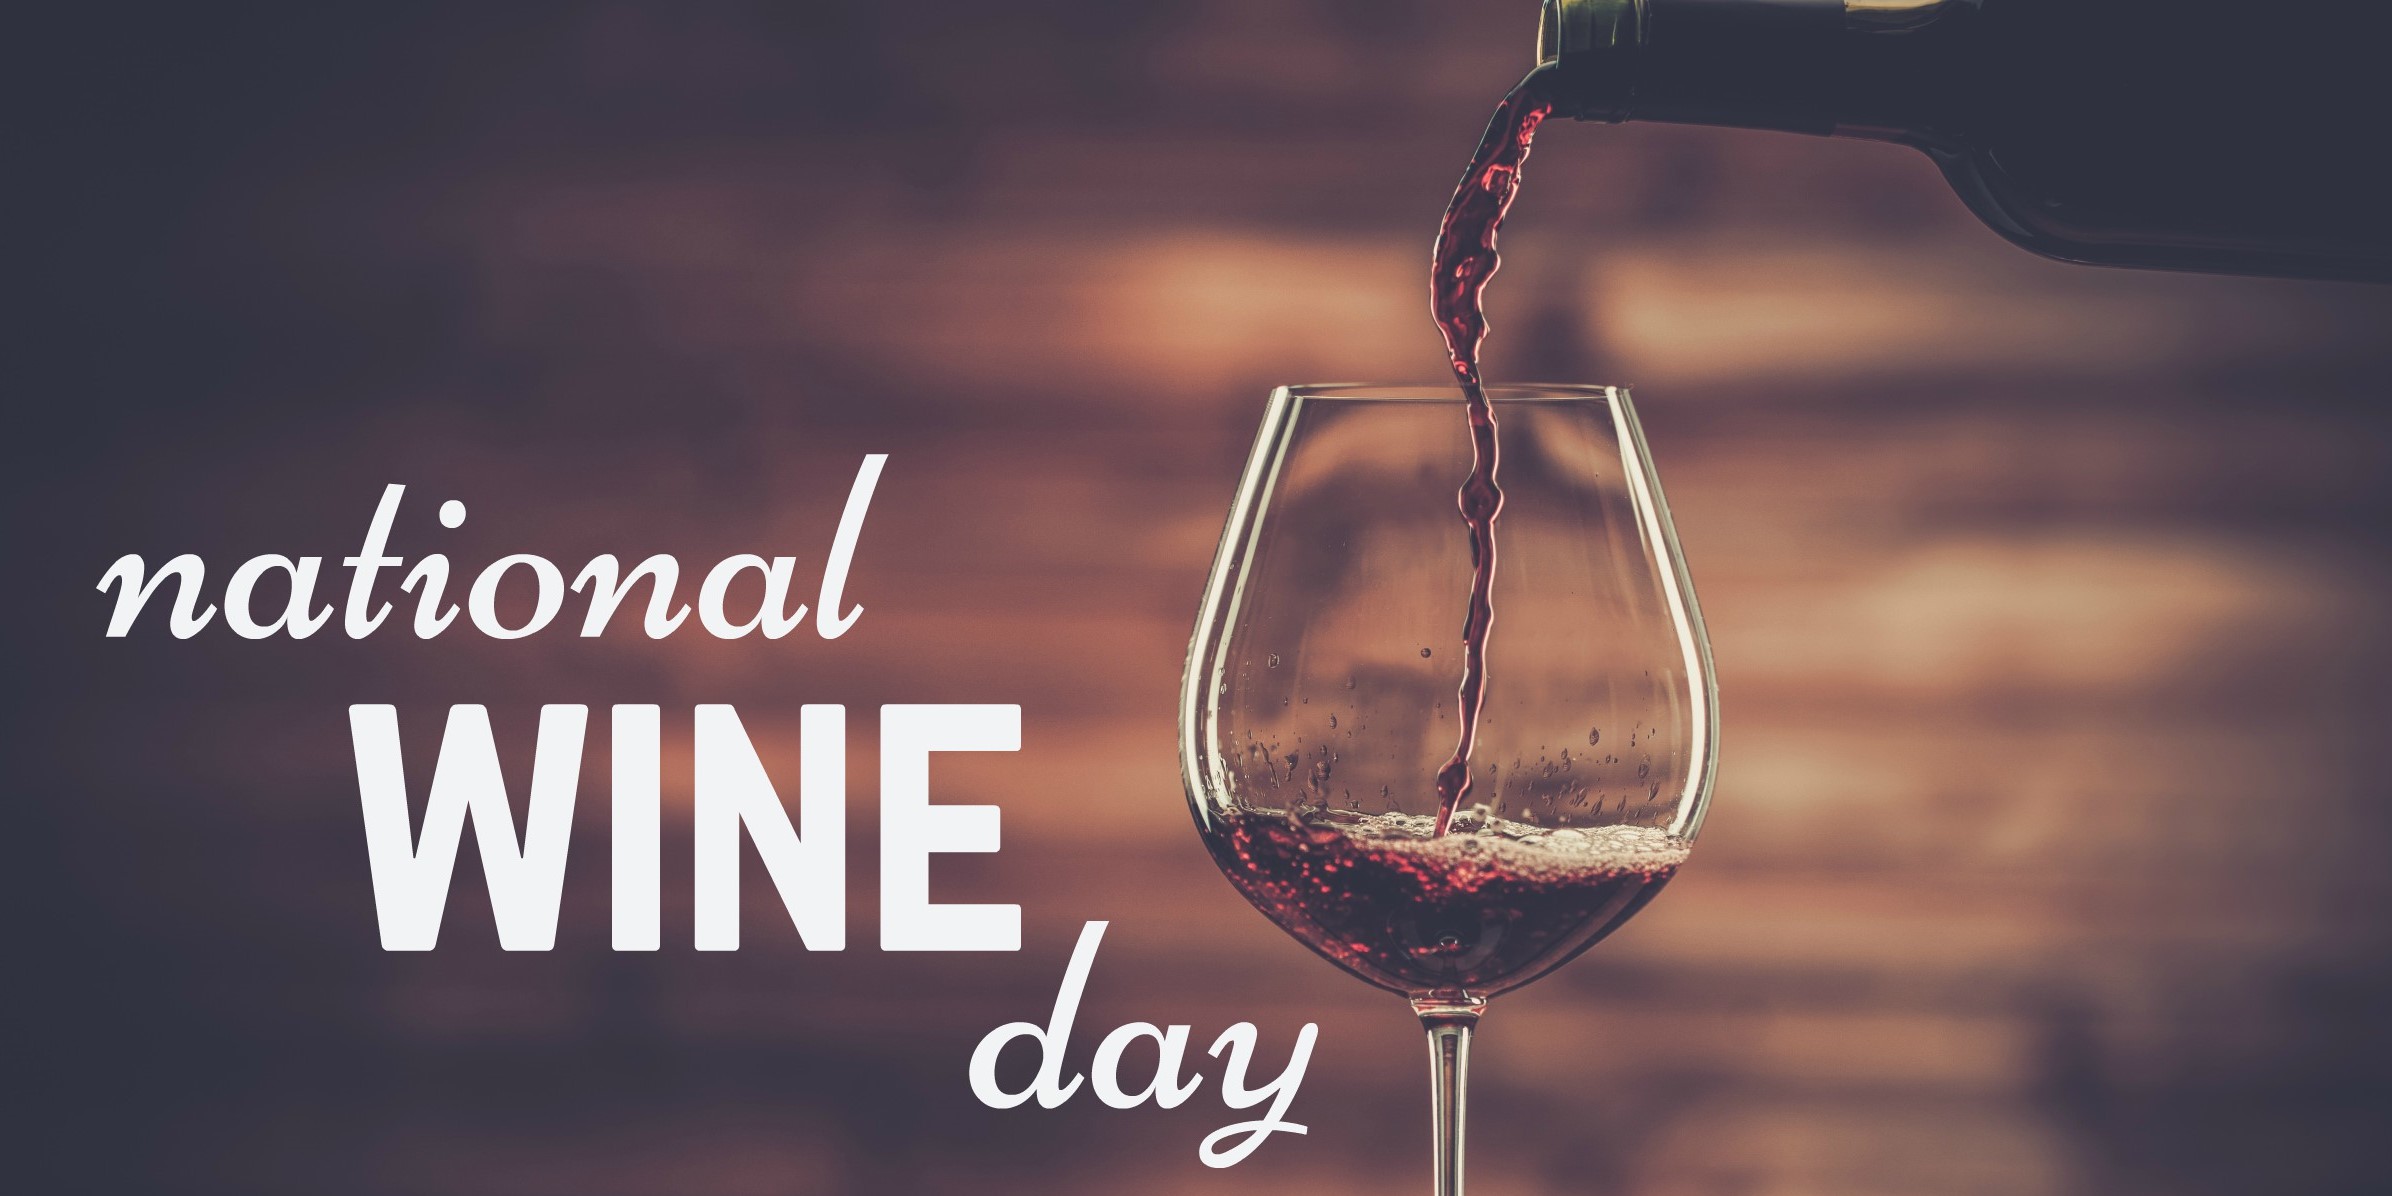 15-facts-about-national-wine-day